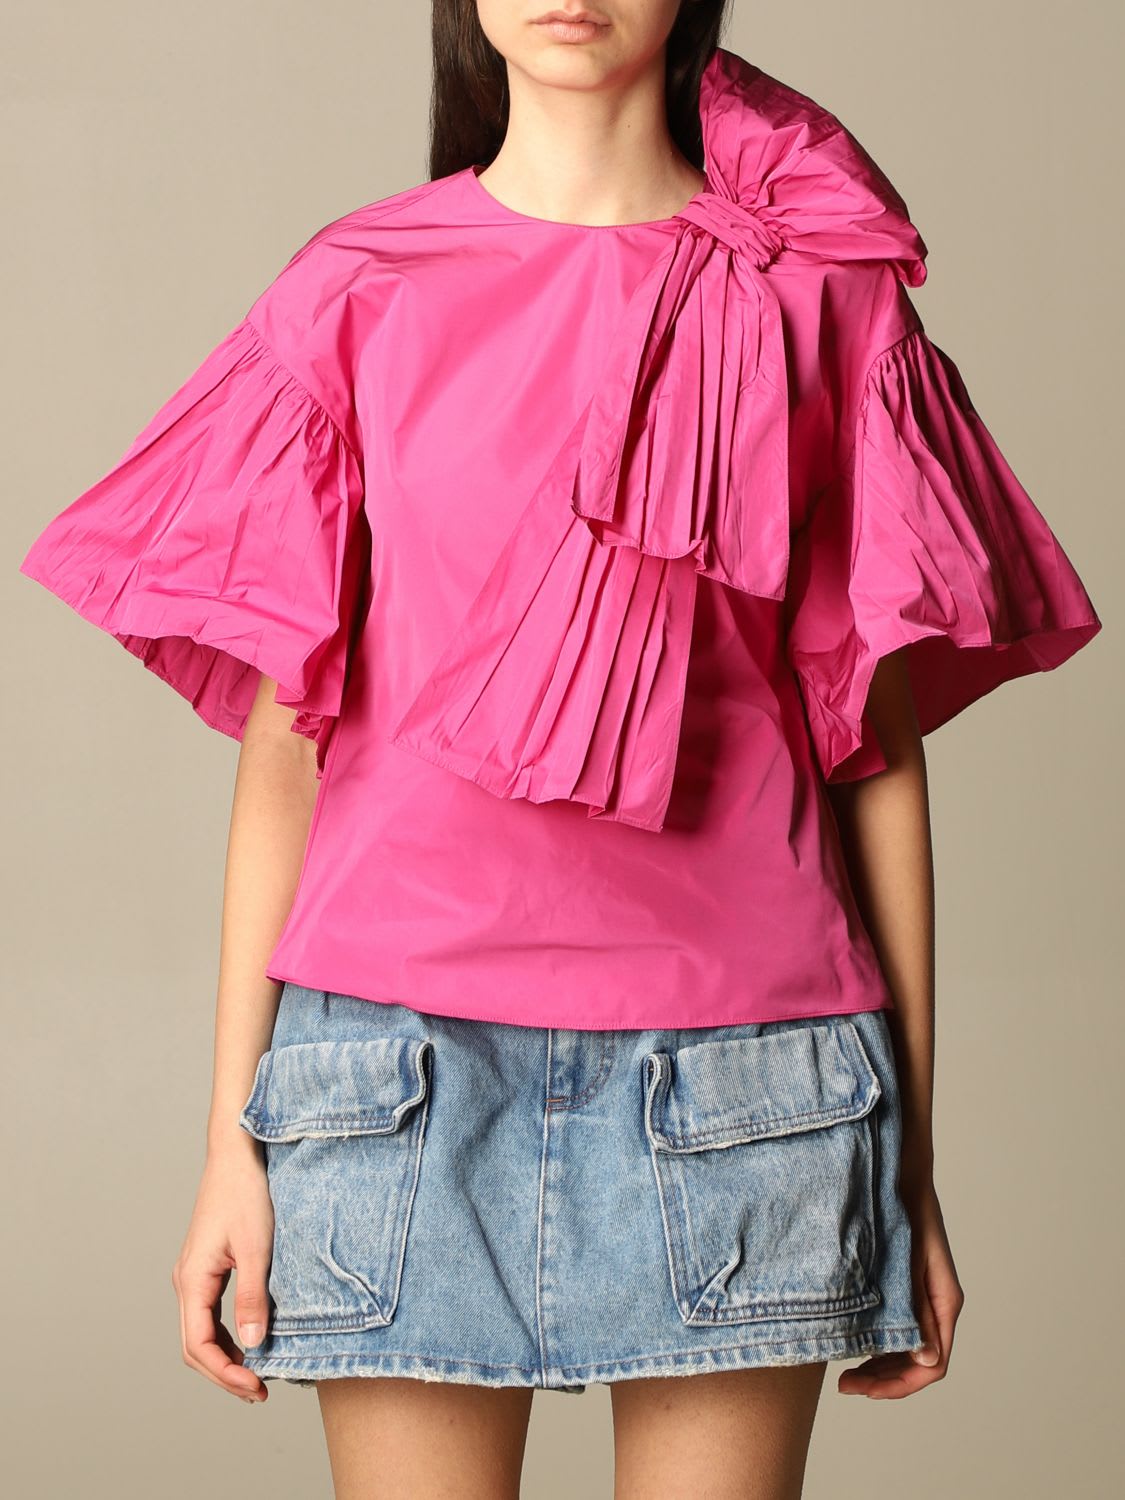 Red Valentino Top Red Valentino Top In Taffeta With Ruffles